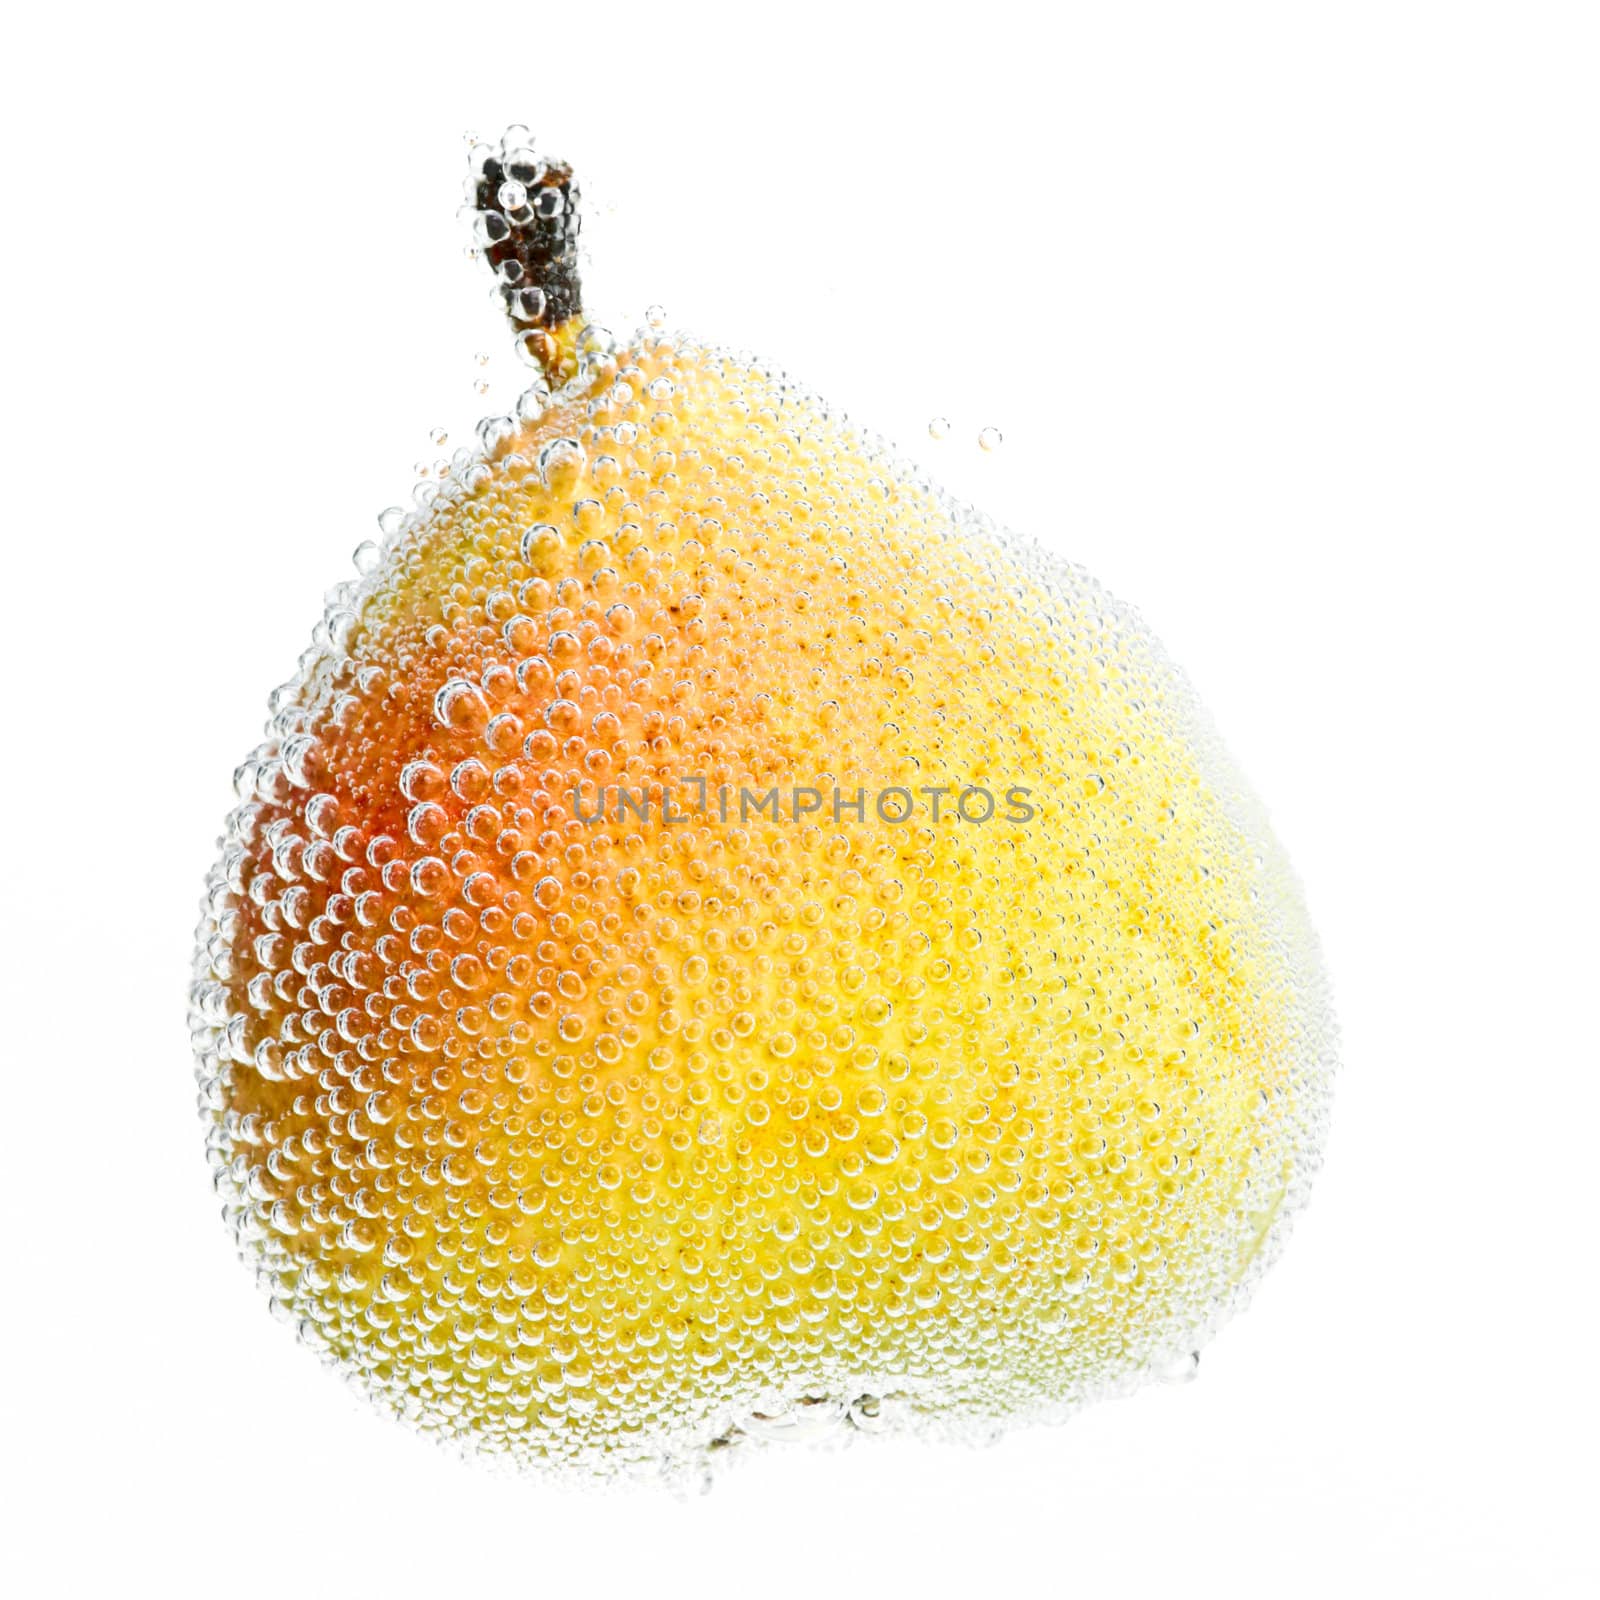 Single pear in water with bubbles on white background